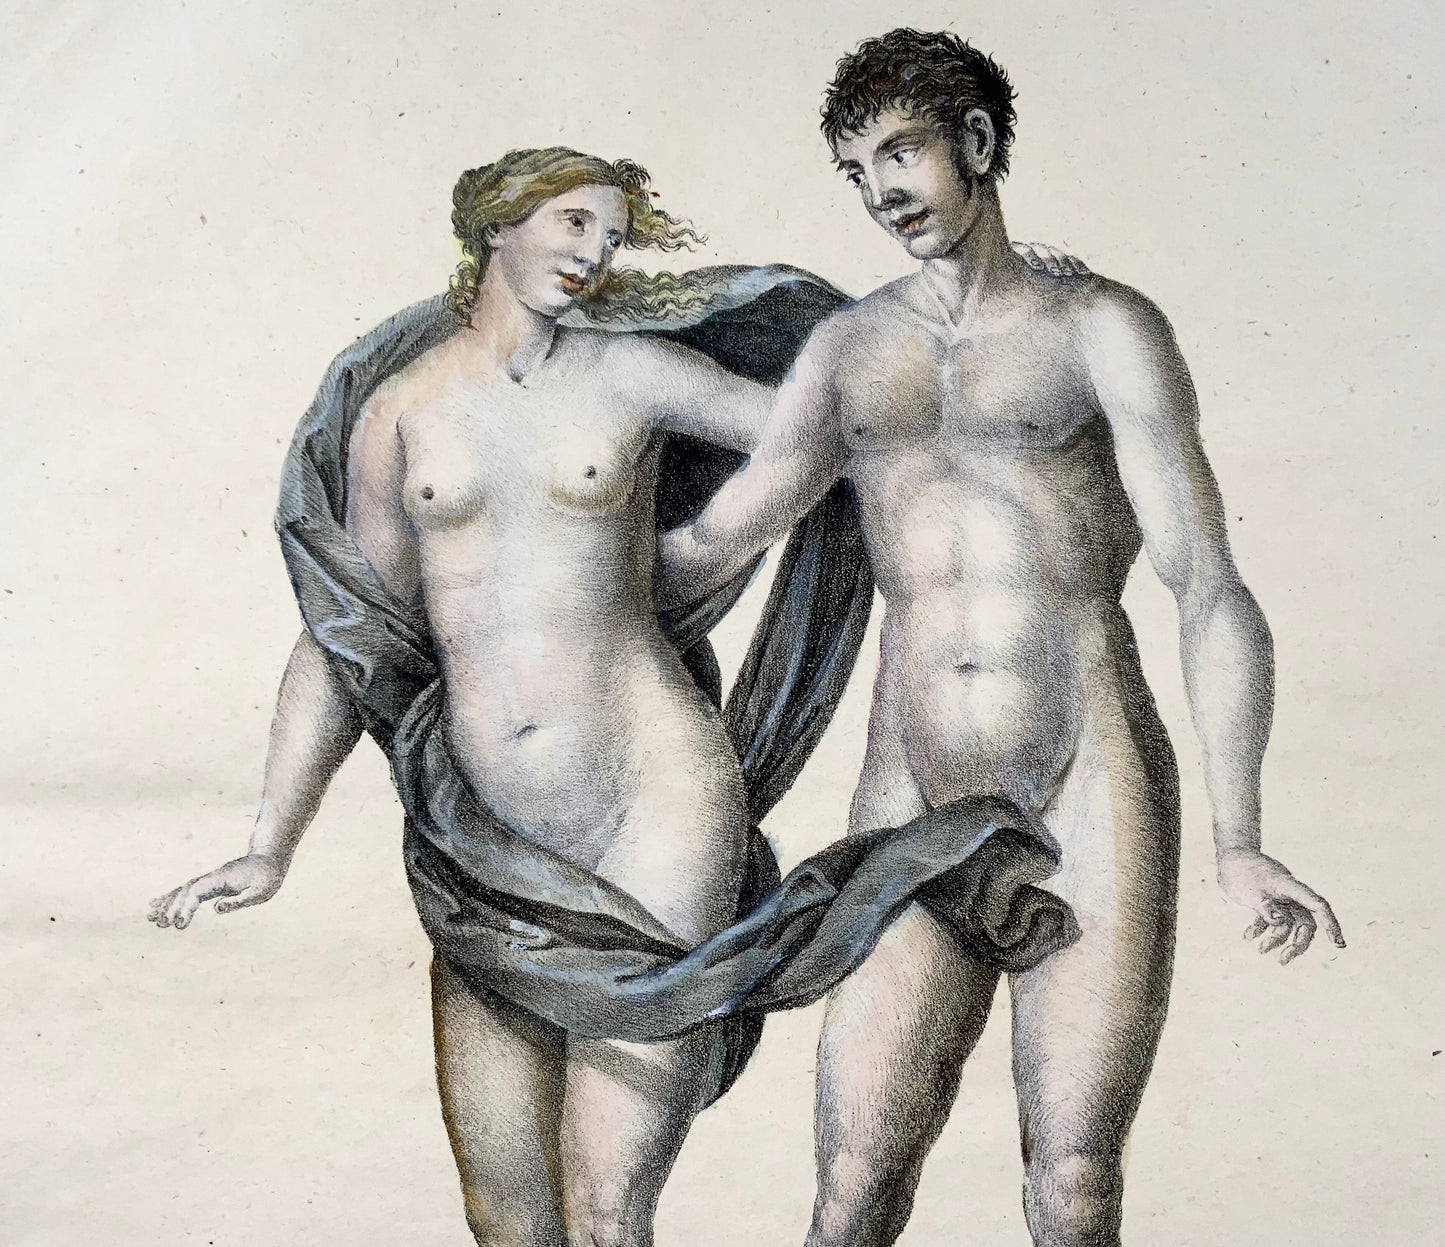 1816 Adam and Eve, Brodtmann, Imp. folio 42.5 cm, lithography in crayon manier, ethnology